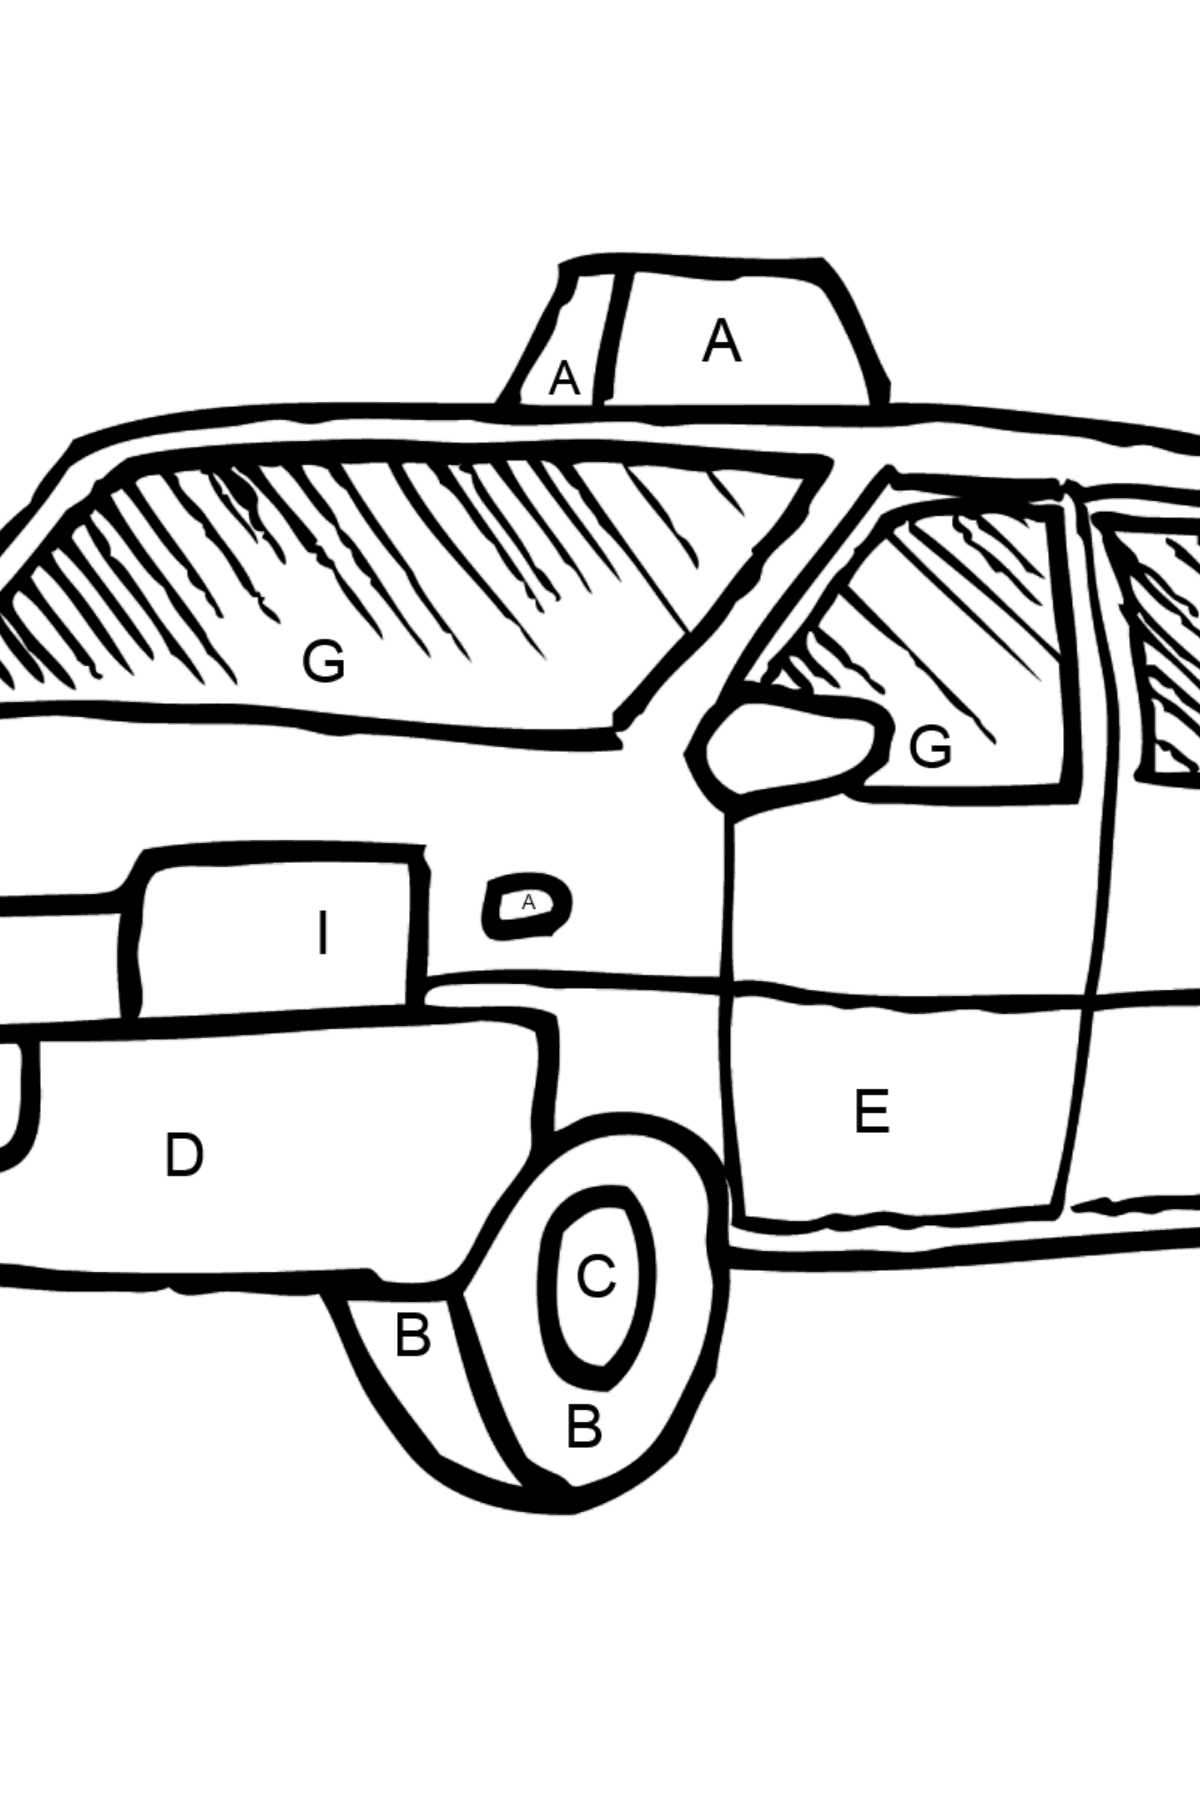 Coloring Page - A Yellow Taxi - Coloring by Letters for Kids